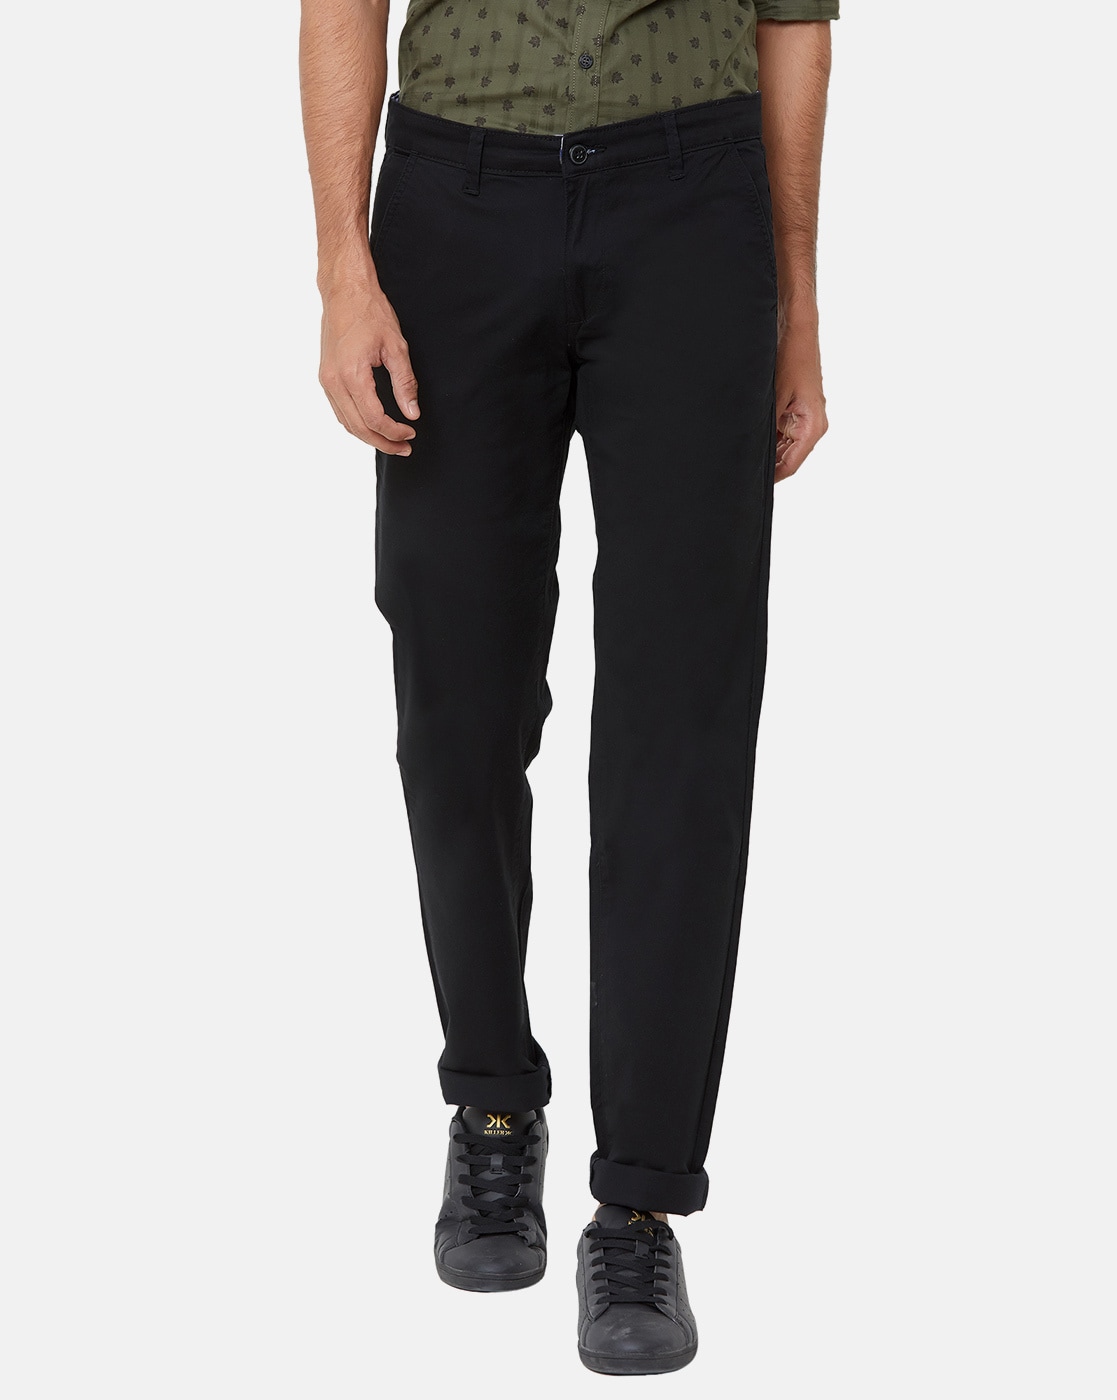 Men Cotton Trousers  Buy Men Cotton Trousers Online Starting at Just 382   Meesho